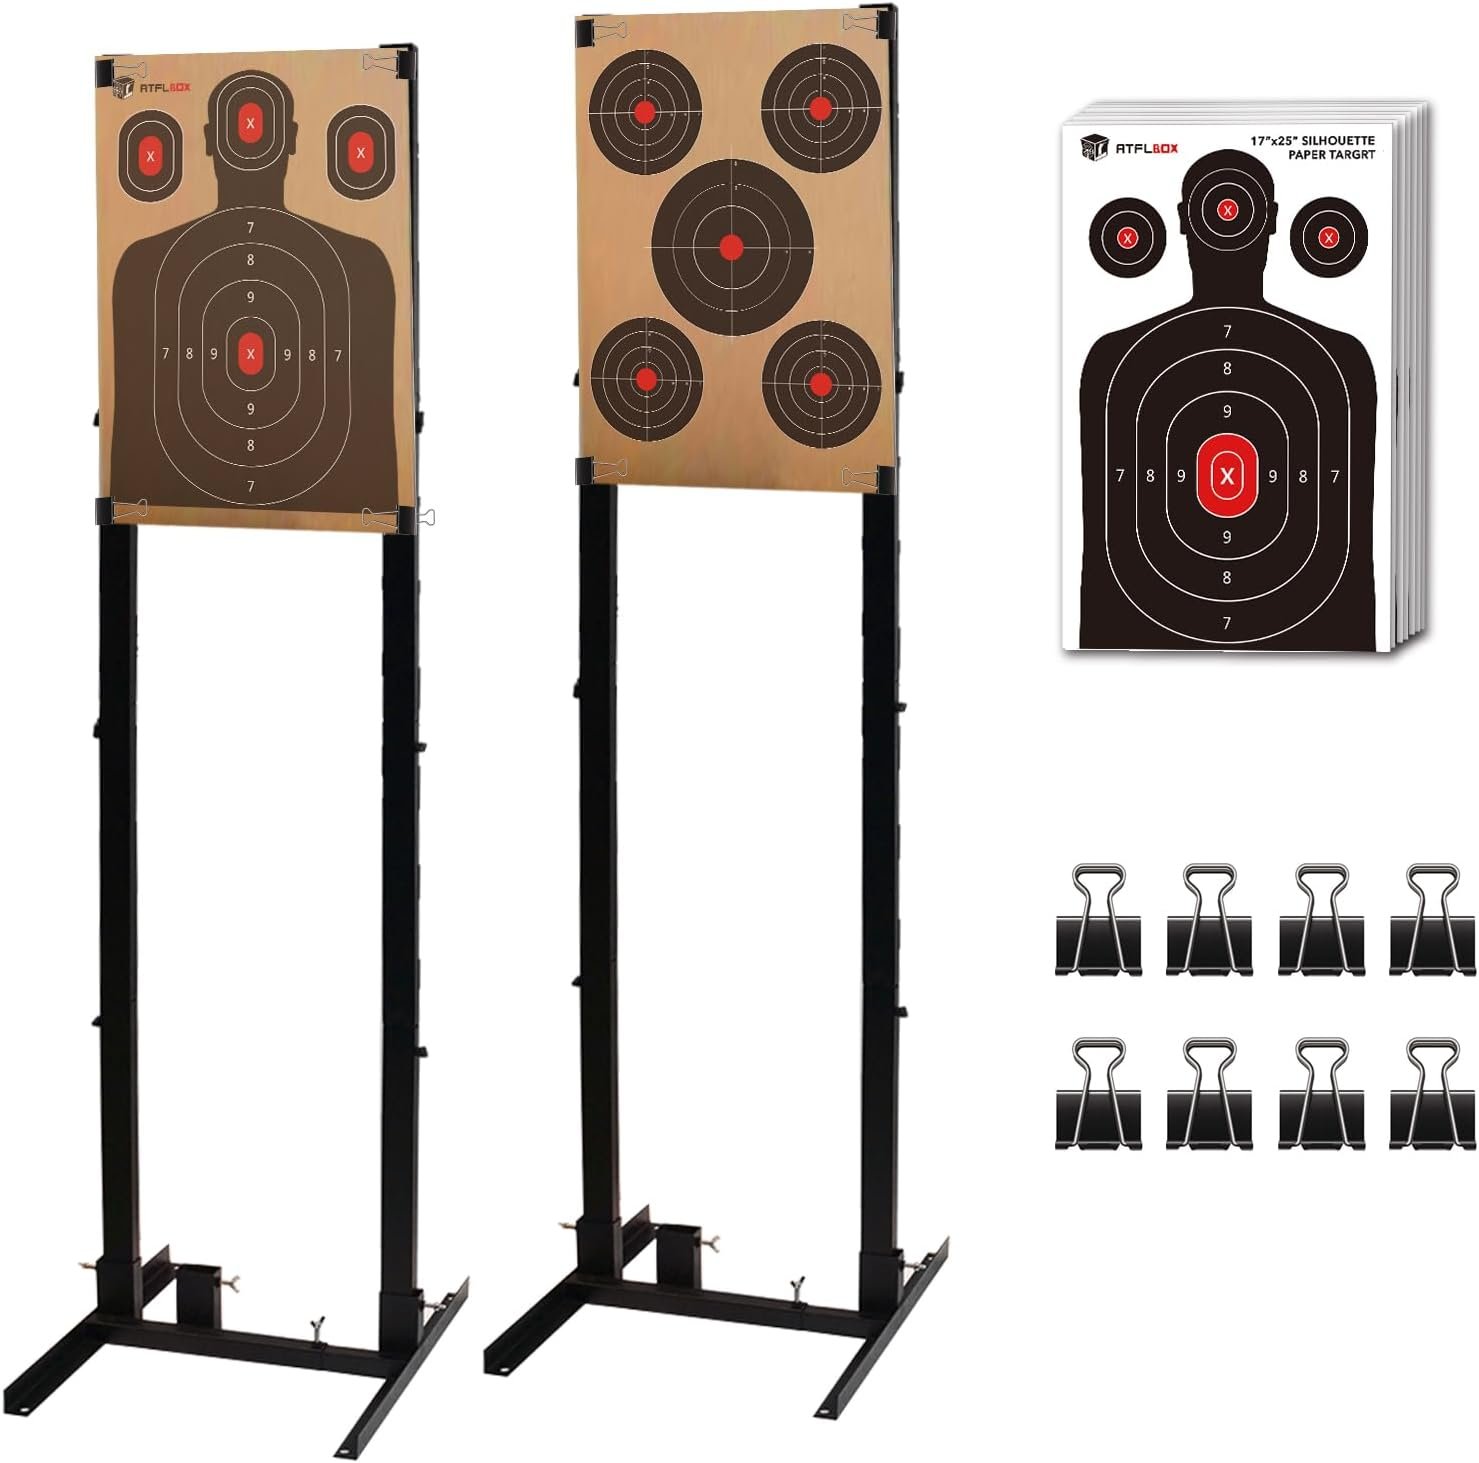 Shooting Target Stand Review